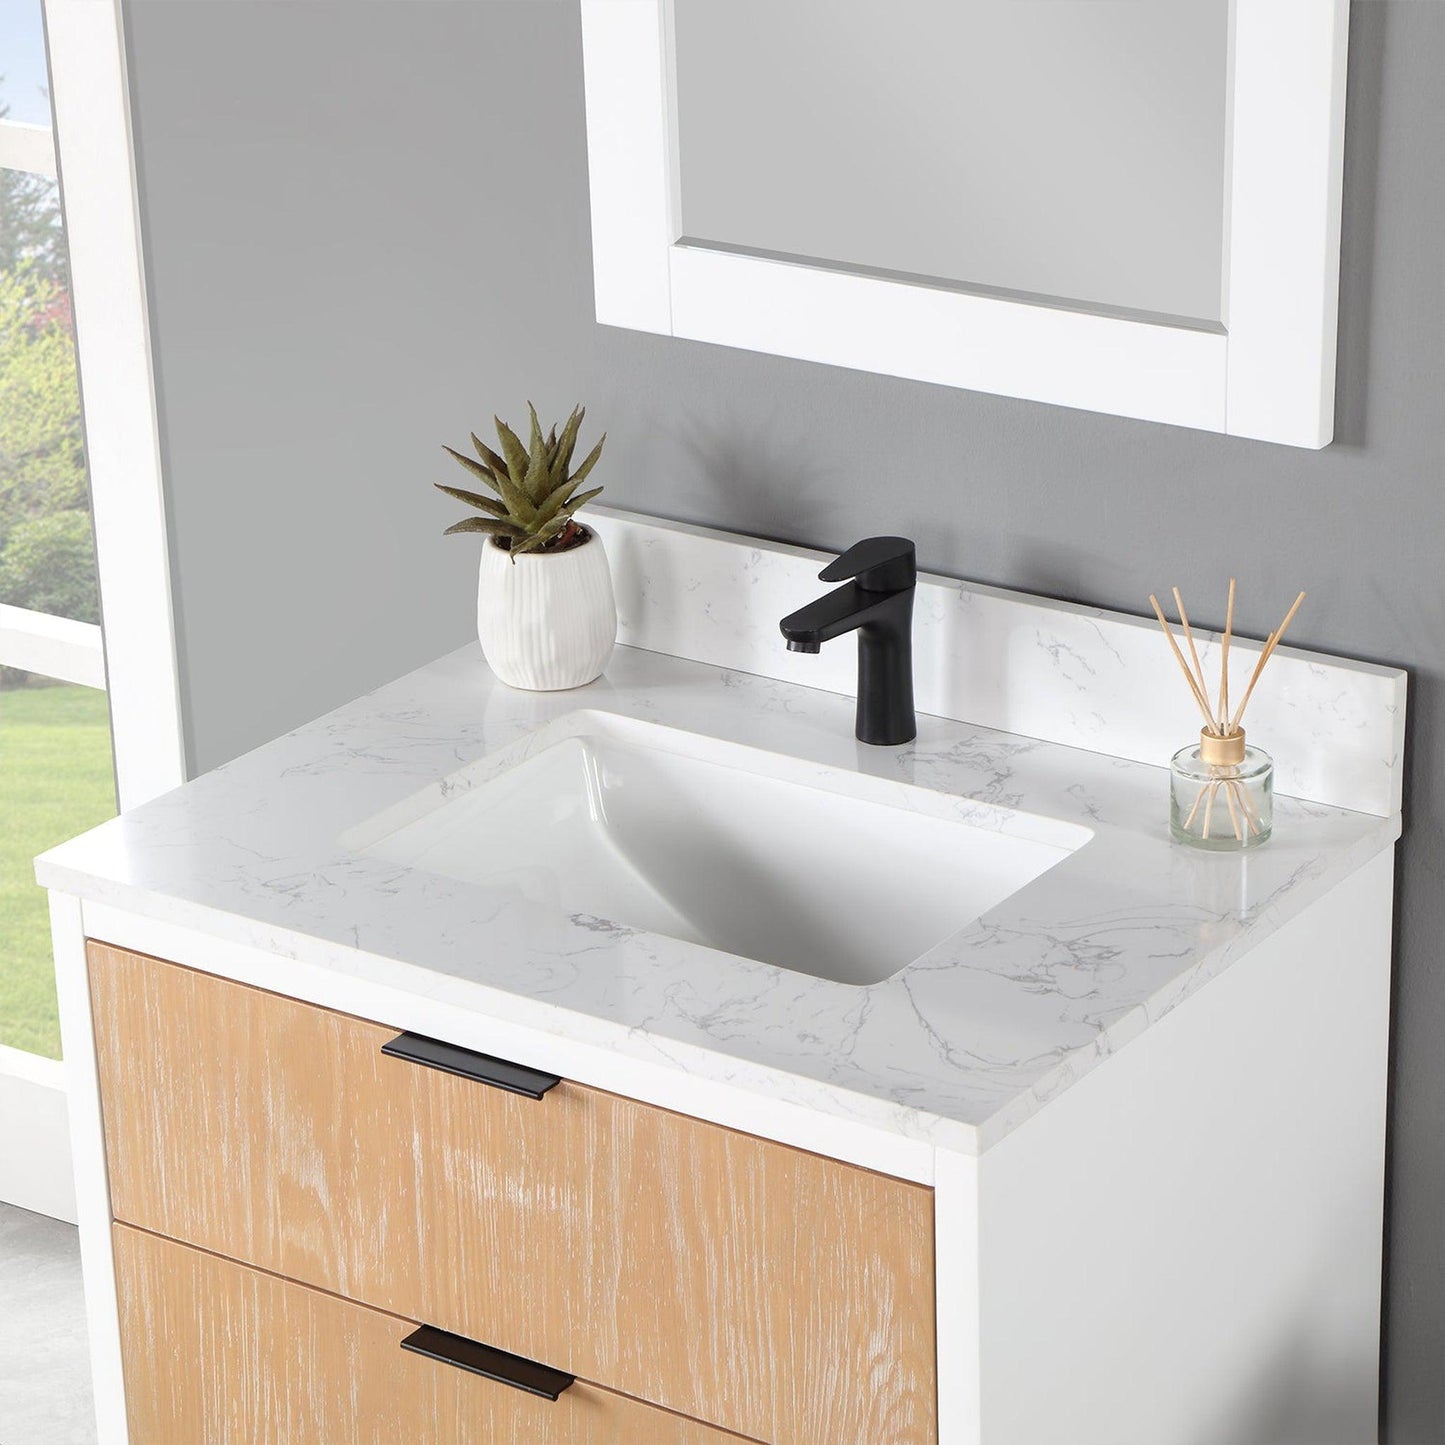 Altair Dione 30" Single Weathered Pine Wall-Mounted Bathroom Vanity Set With Mirror, Aosta White Composite Stone Top, Single Rectangular Undermount Ceramic Sink, Overflow, and Backsplash